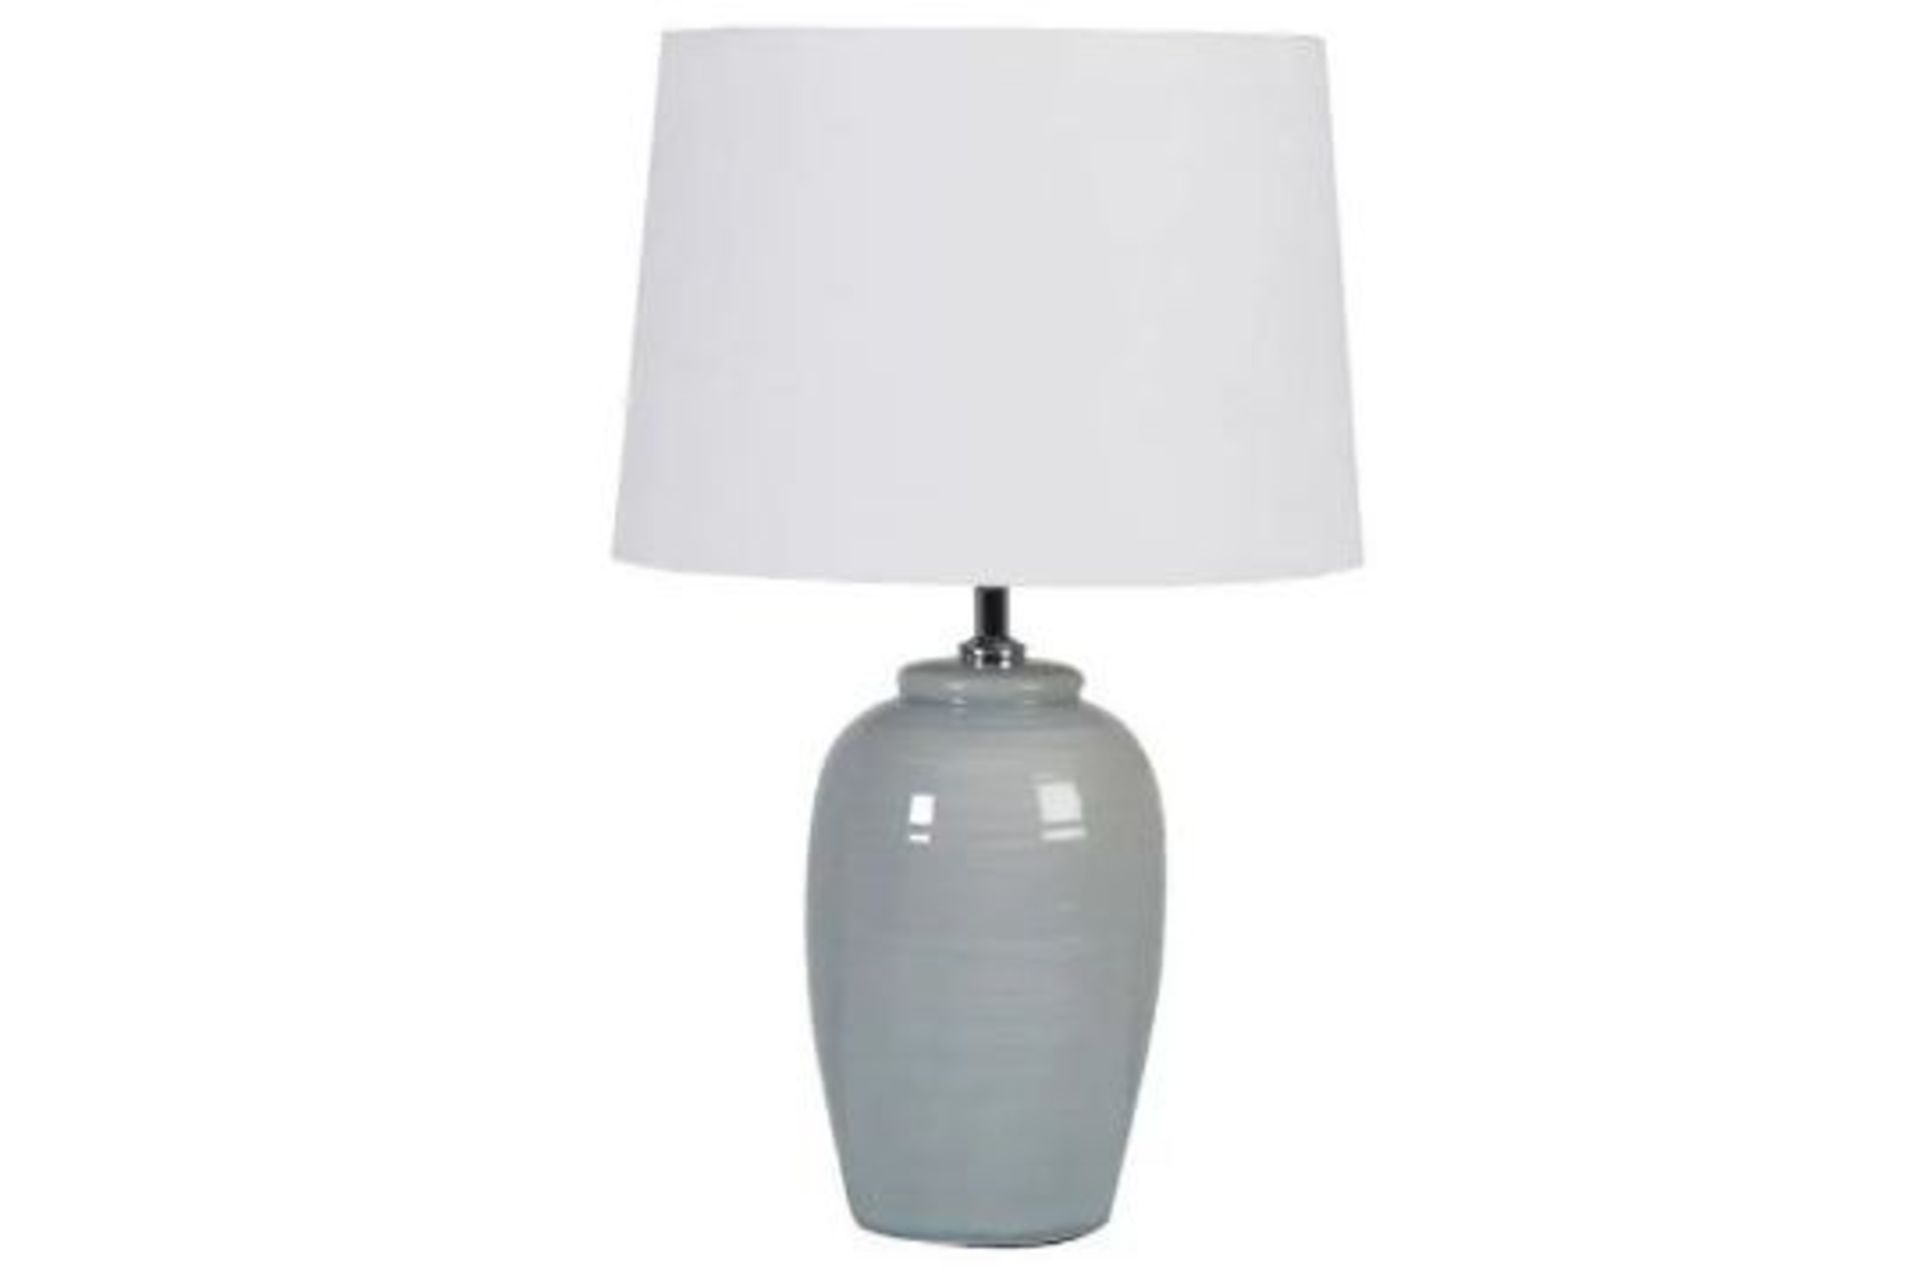 Pale Green Table Lamp With Shade. - ER45